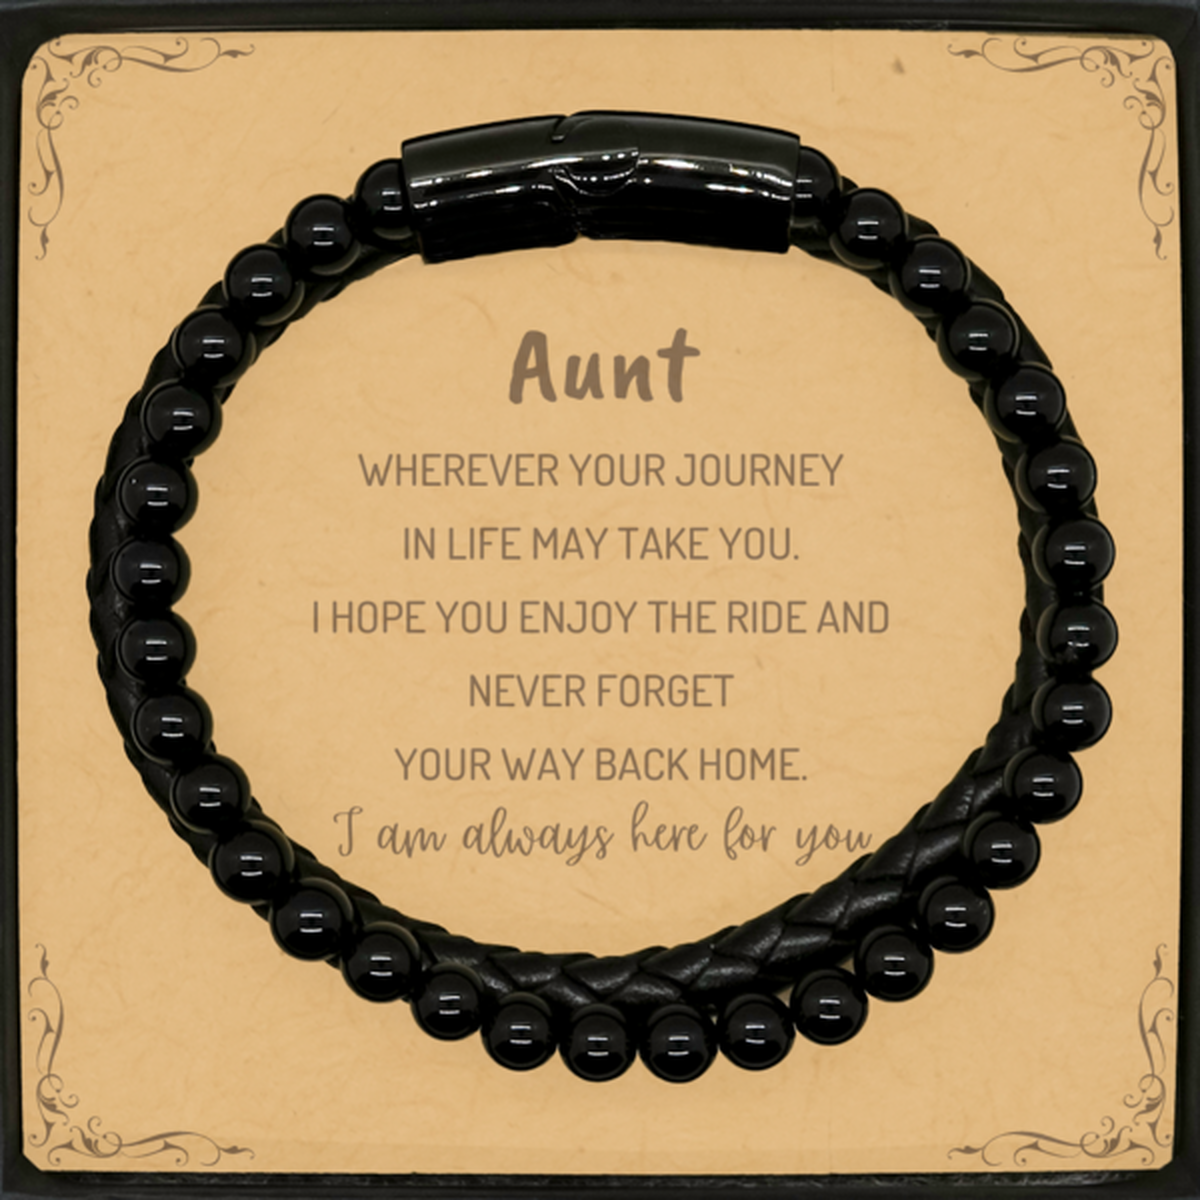 Aunt wherever your journey in life may take you, I am always here for you Aunt Stone Leather Bracelets, Awesome Christmas Gifts For Aunt Message Card, Aunt Birthday Gifts for Men Women Family Loved One